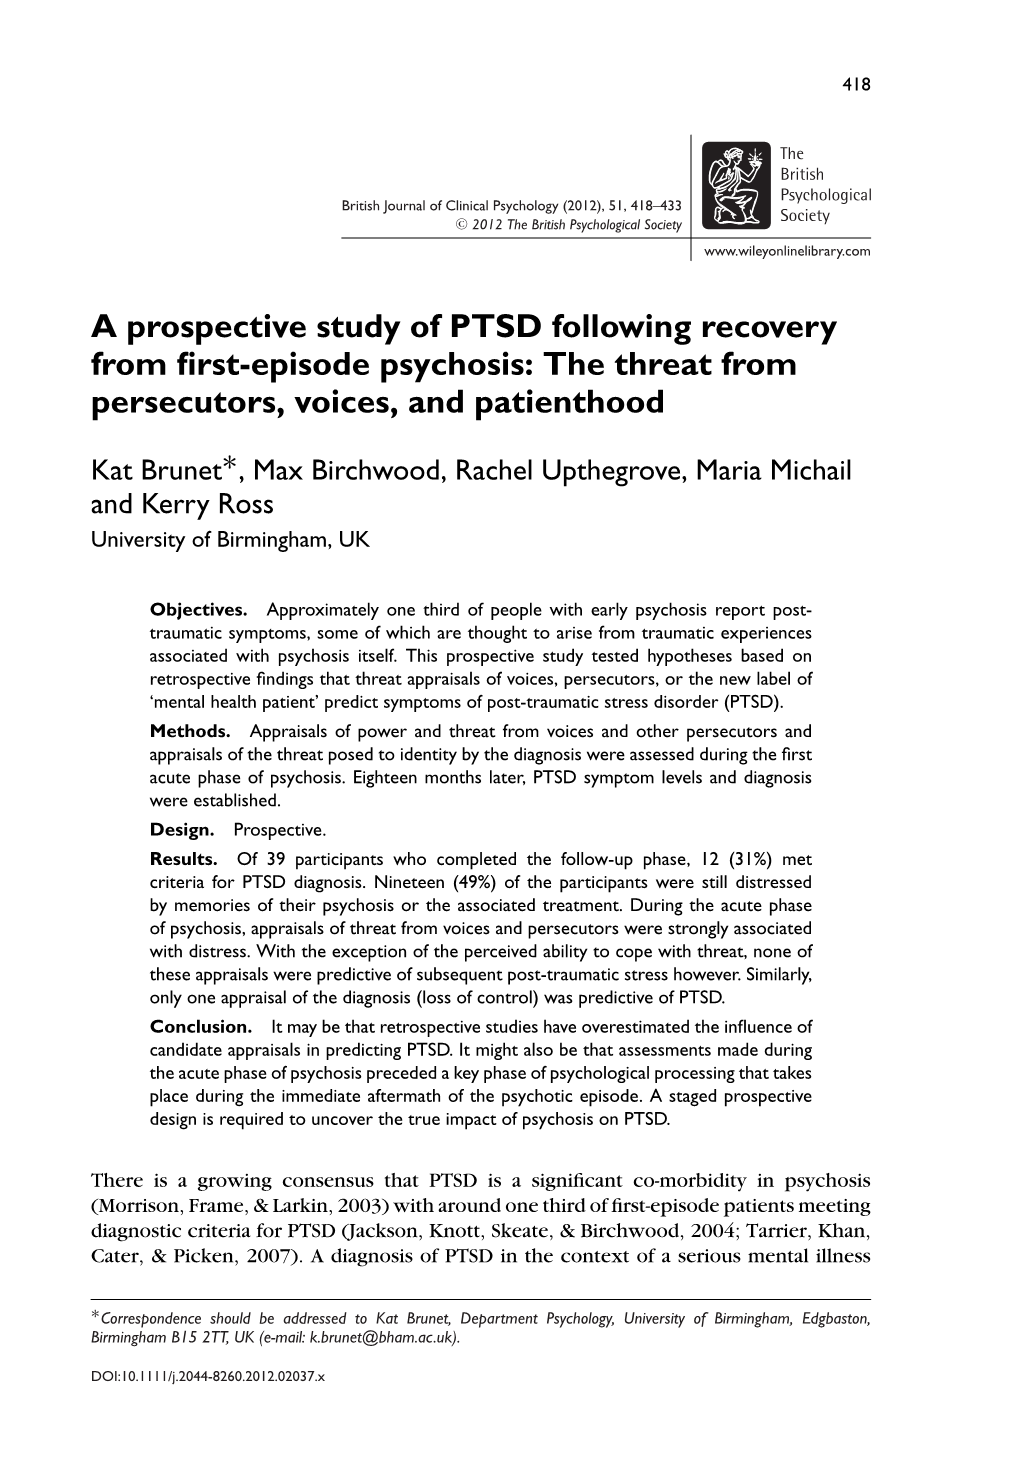 A Prospective Study of PTSD Following Recovery from Firstepisode Psychosis: the Threat from Persecutors, Voices, and Patienthood